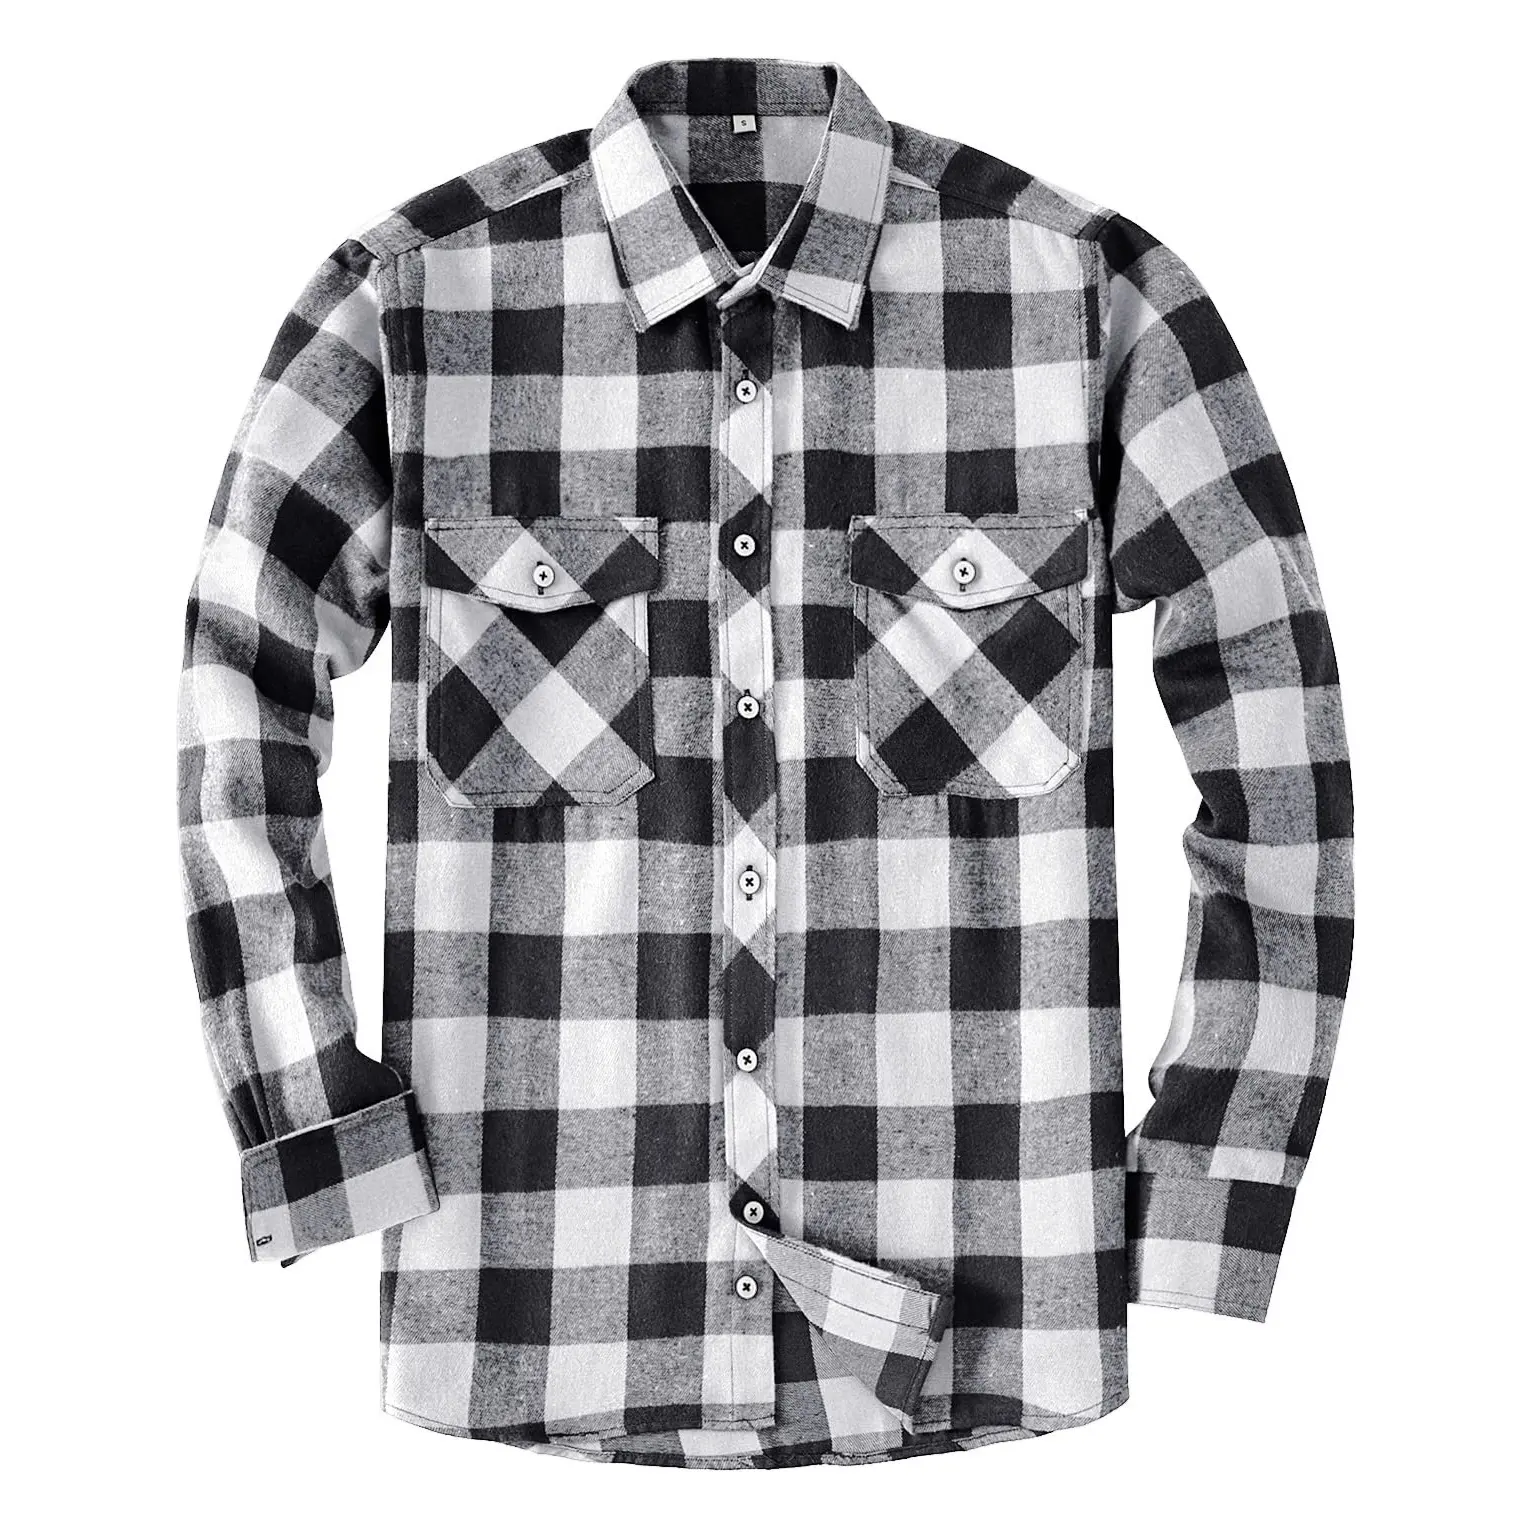 Man's cotton designer wear gentleman plaid overshirt relaxed fit checked shirt Vacation stylish OEM flannel shirts Casual Shirts